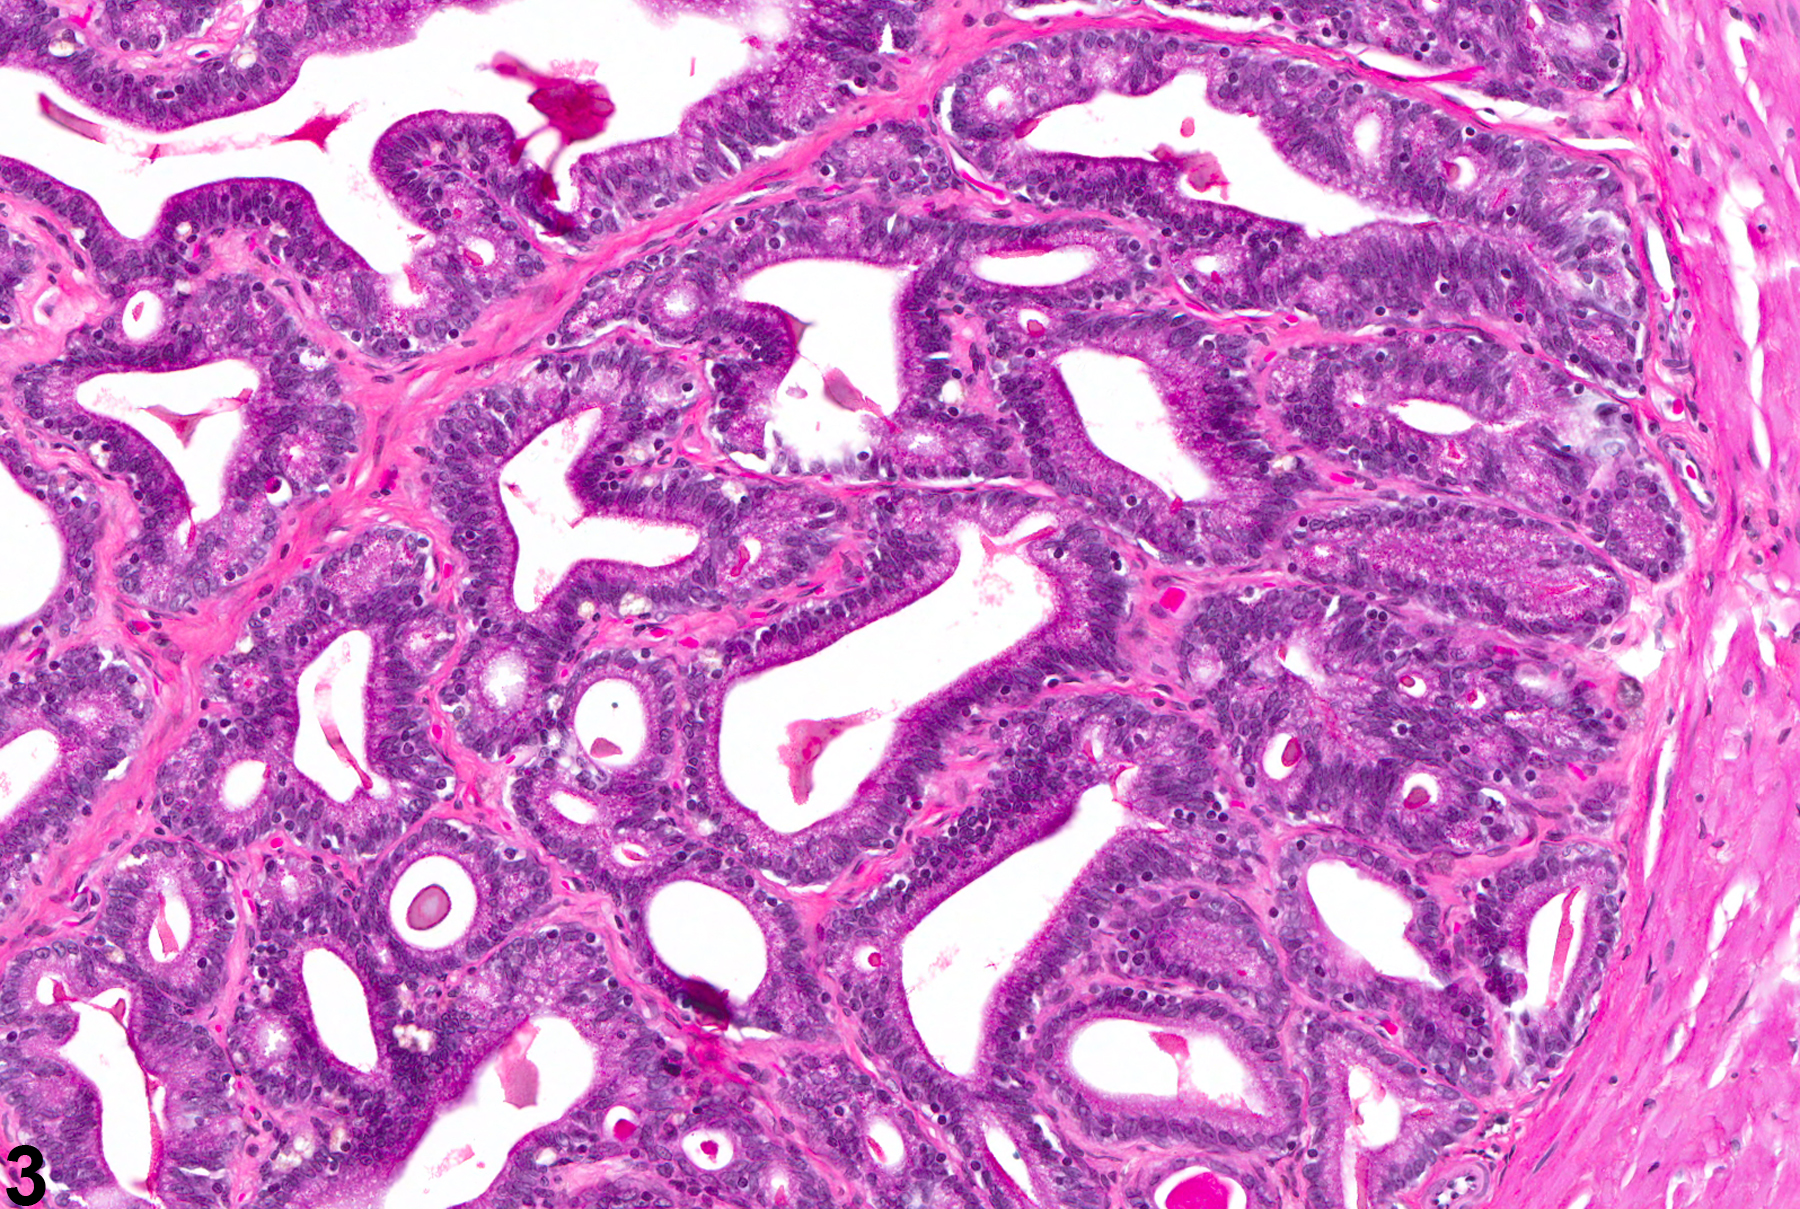 Image of epithelial hyperplasia in the seminal vesicle from a male F344/N rat in an chronic study